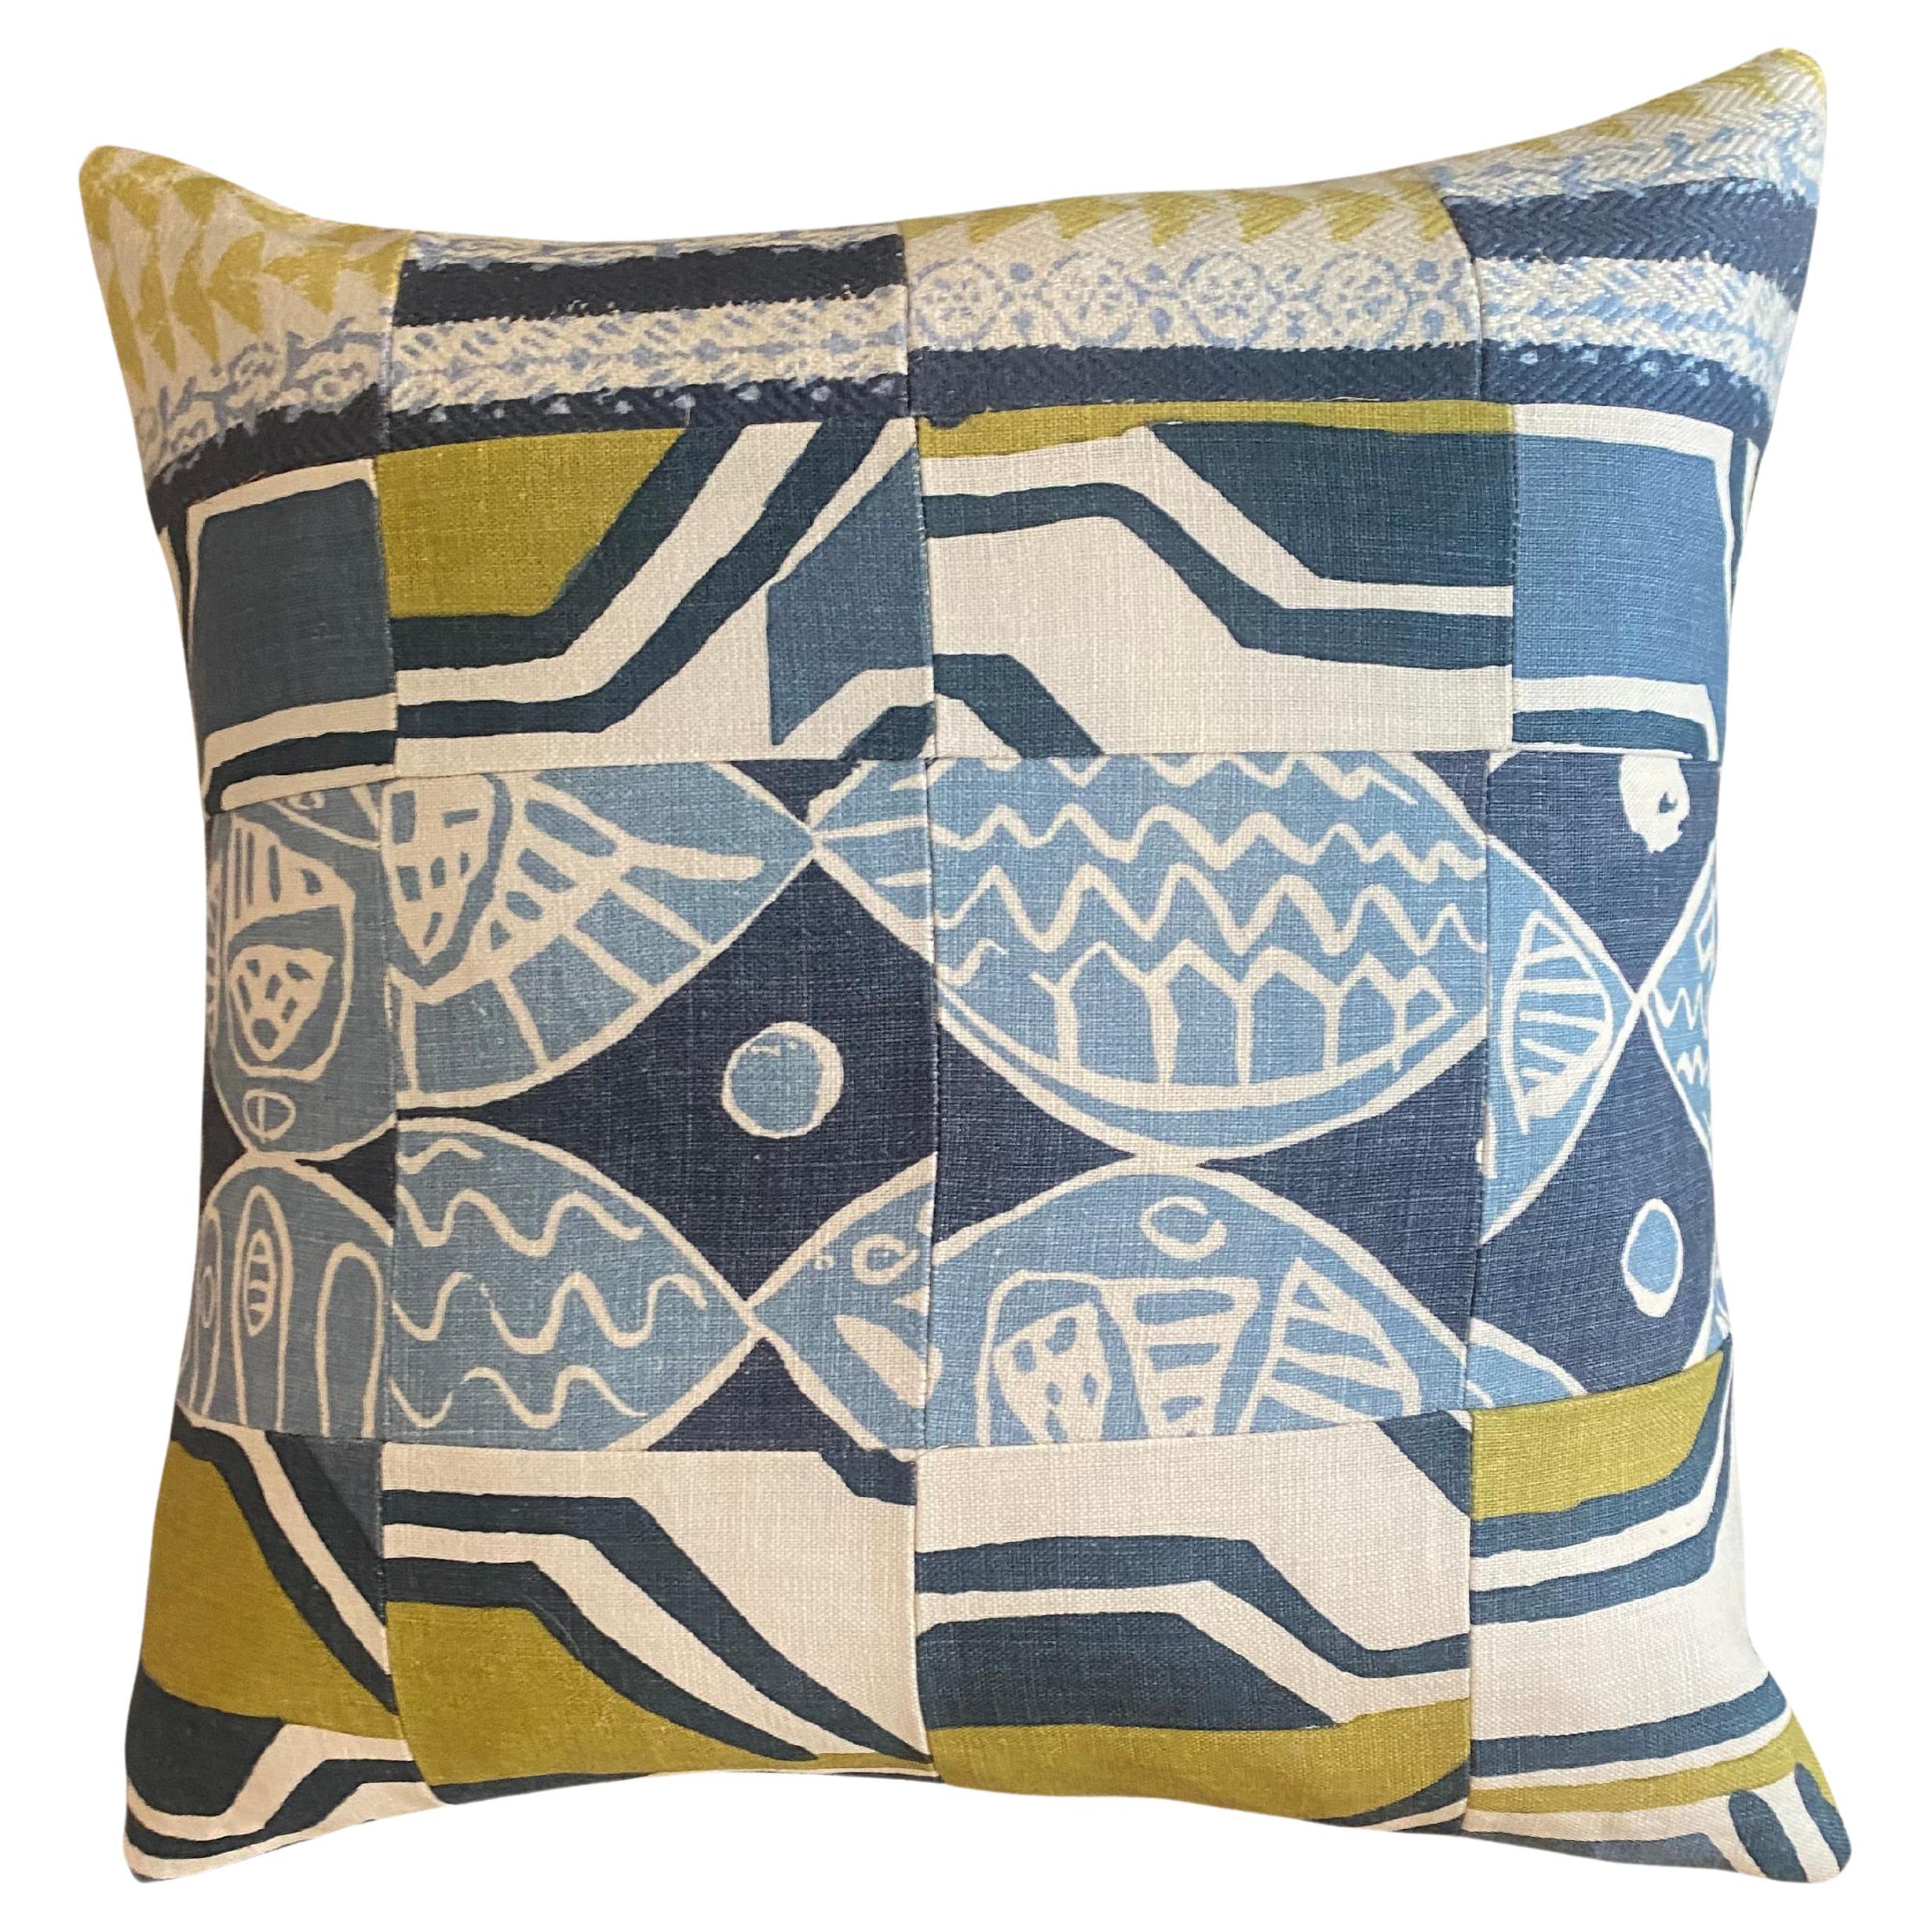 Batik Fabric " Flag " Style Pillow with Light Blue Jean Inspired Back with Knife For Sale